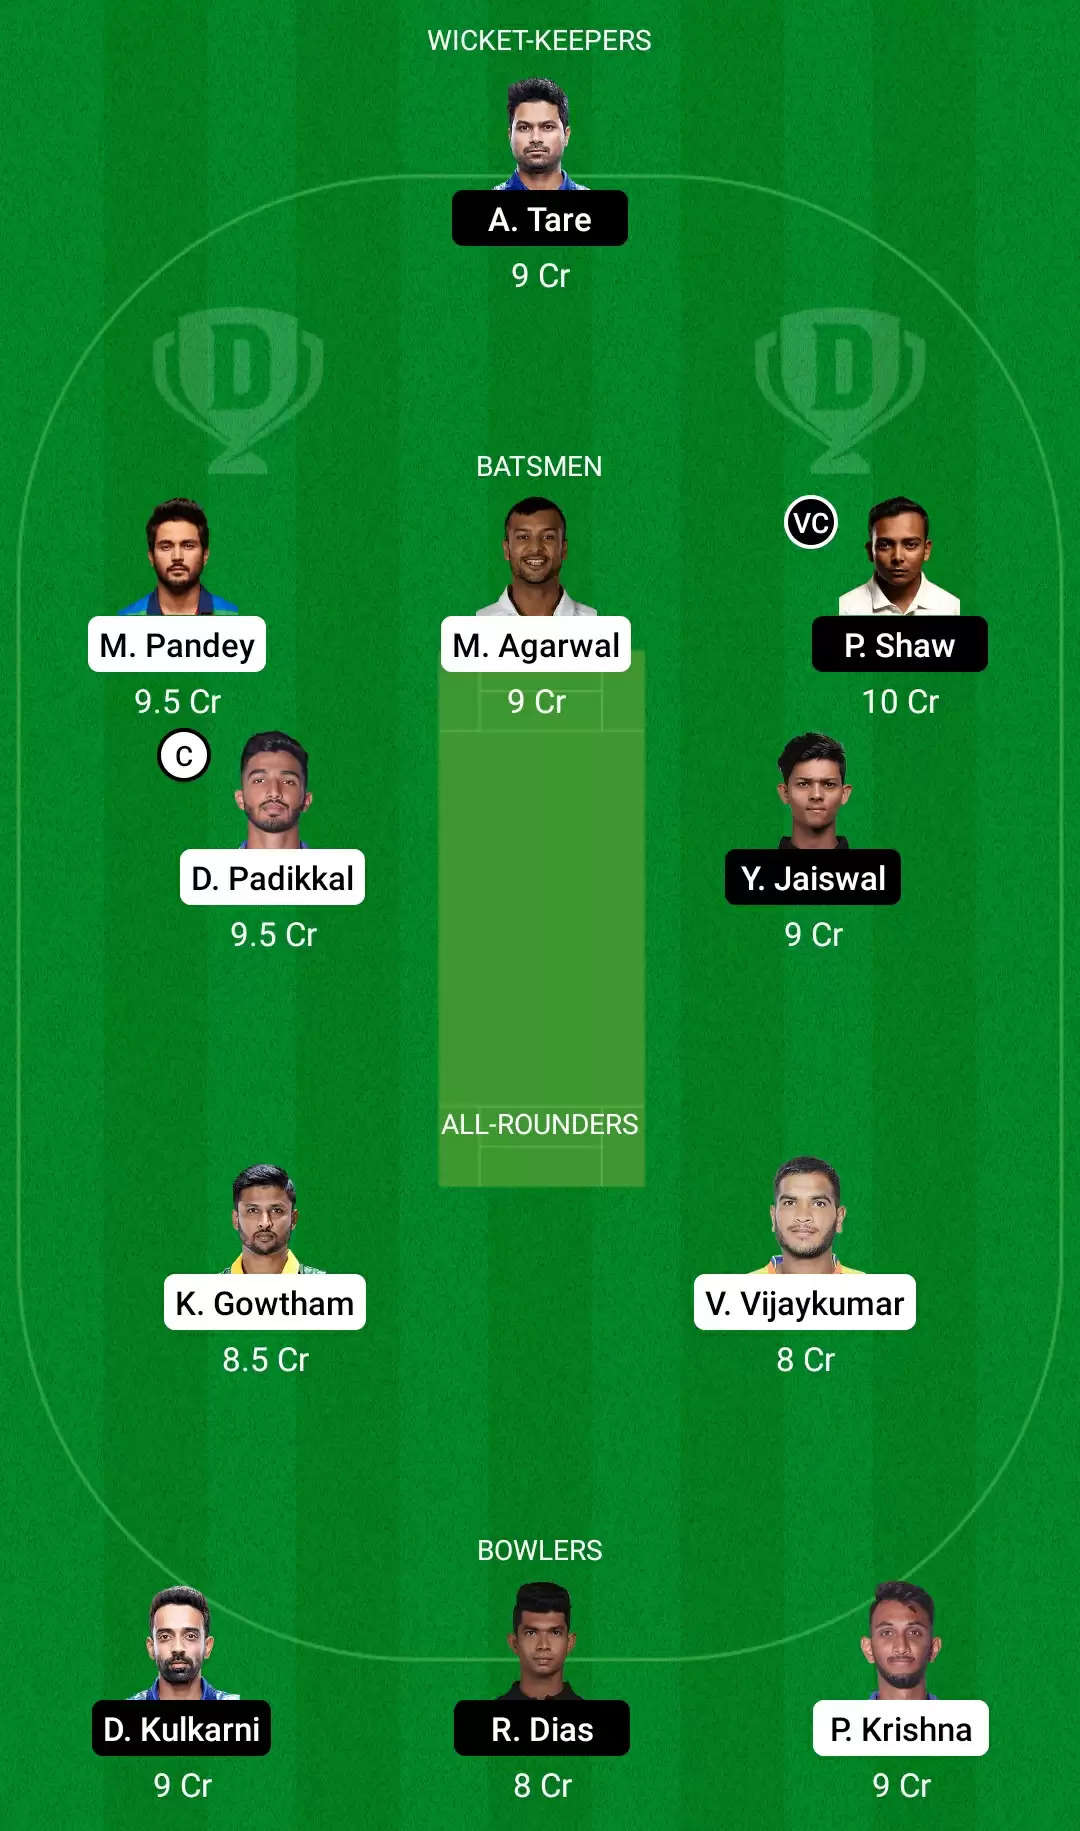 KAR vs MUM Dream11 Prediction for Syed Mushtaq Ali Trophy 2021/22: Playing XI, Fantasy Cricket Tips, Team, Weather Updates and Pitch Report